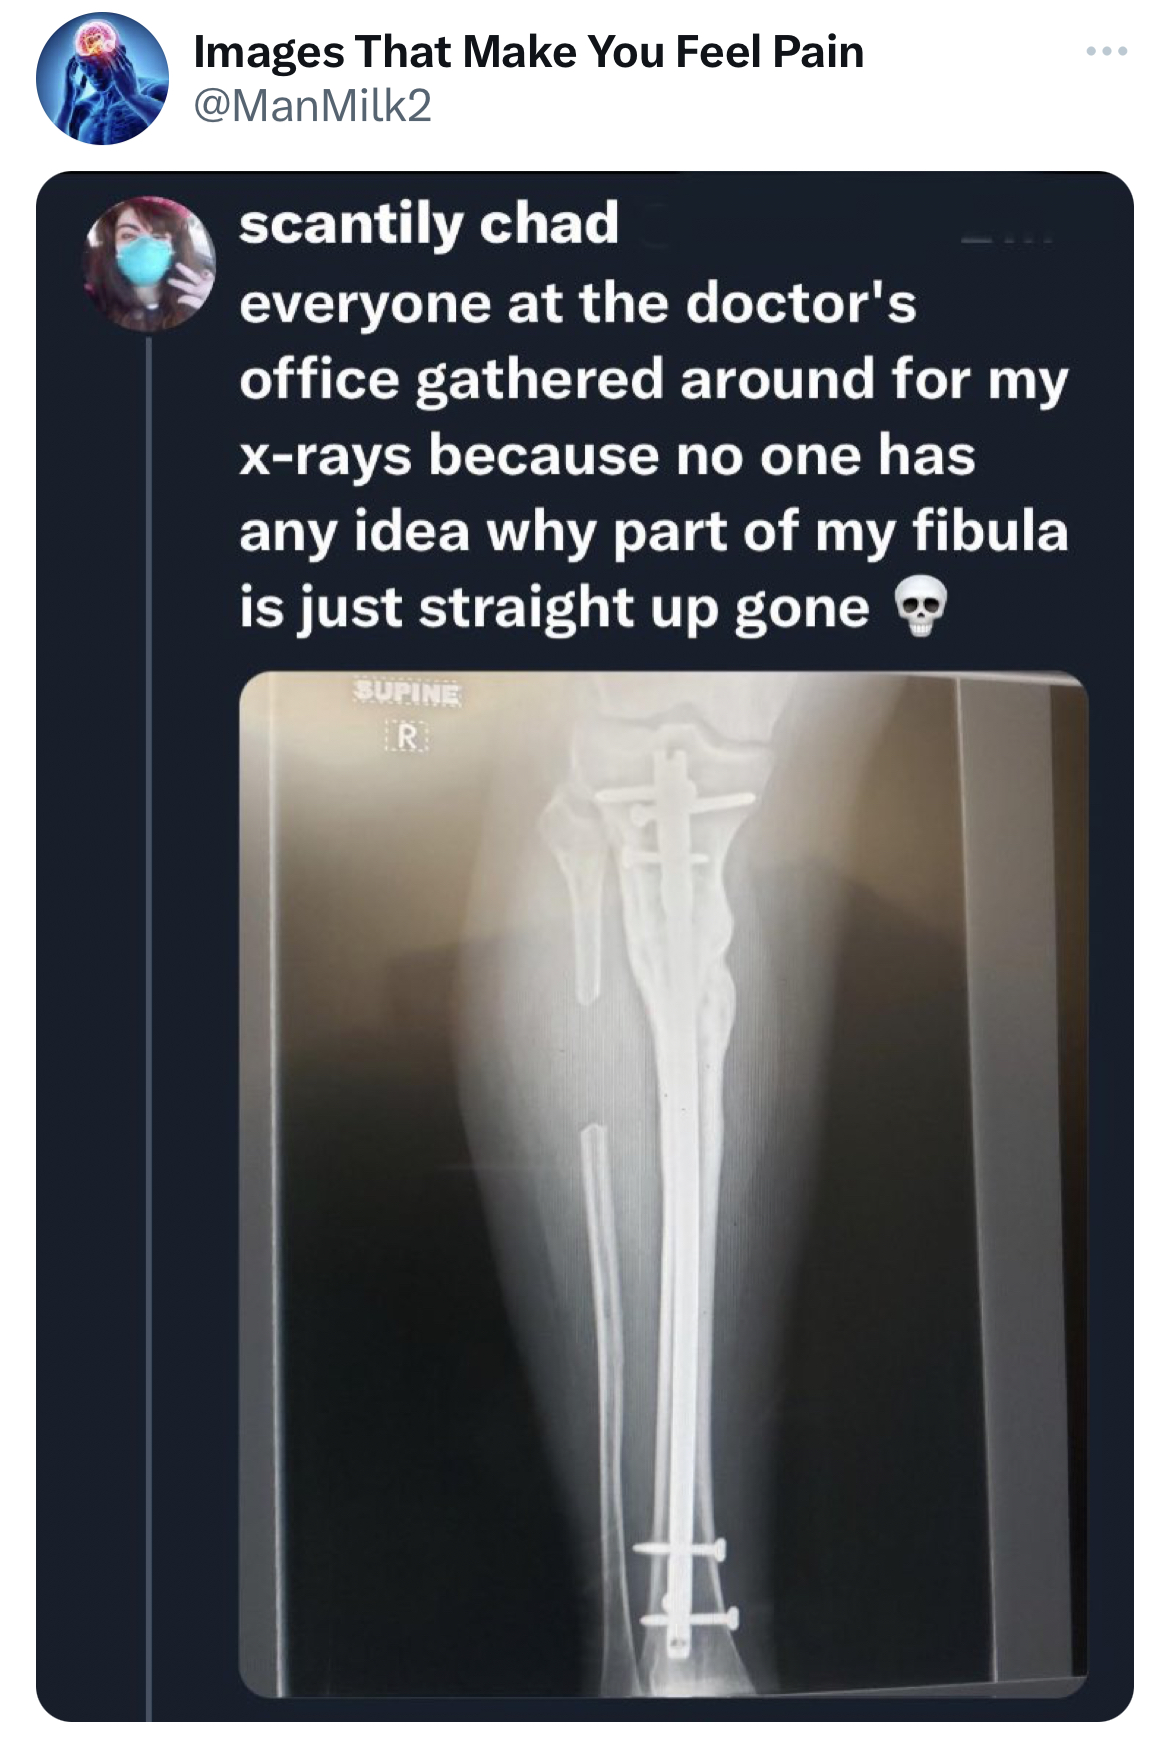 savage tweets - x ray - Images That Make You Feel Pain scantily chad everyone at the doctor's office gathered around for my xrays because no one has any idea why part of my fibula is just straight up gone Dupine